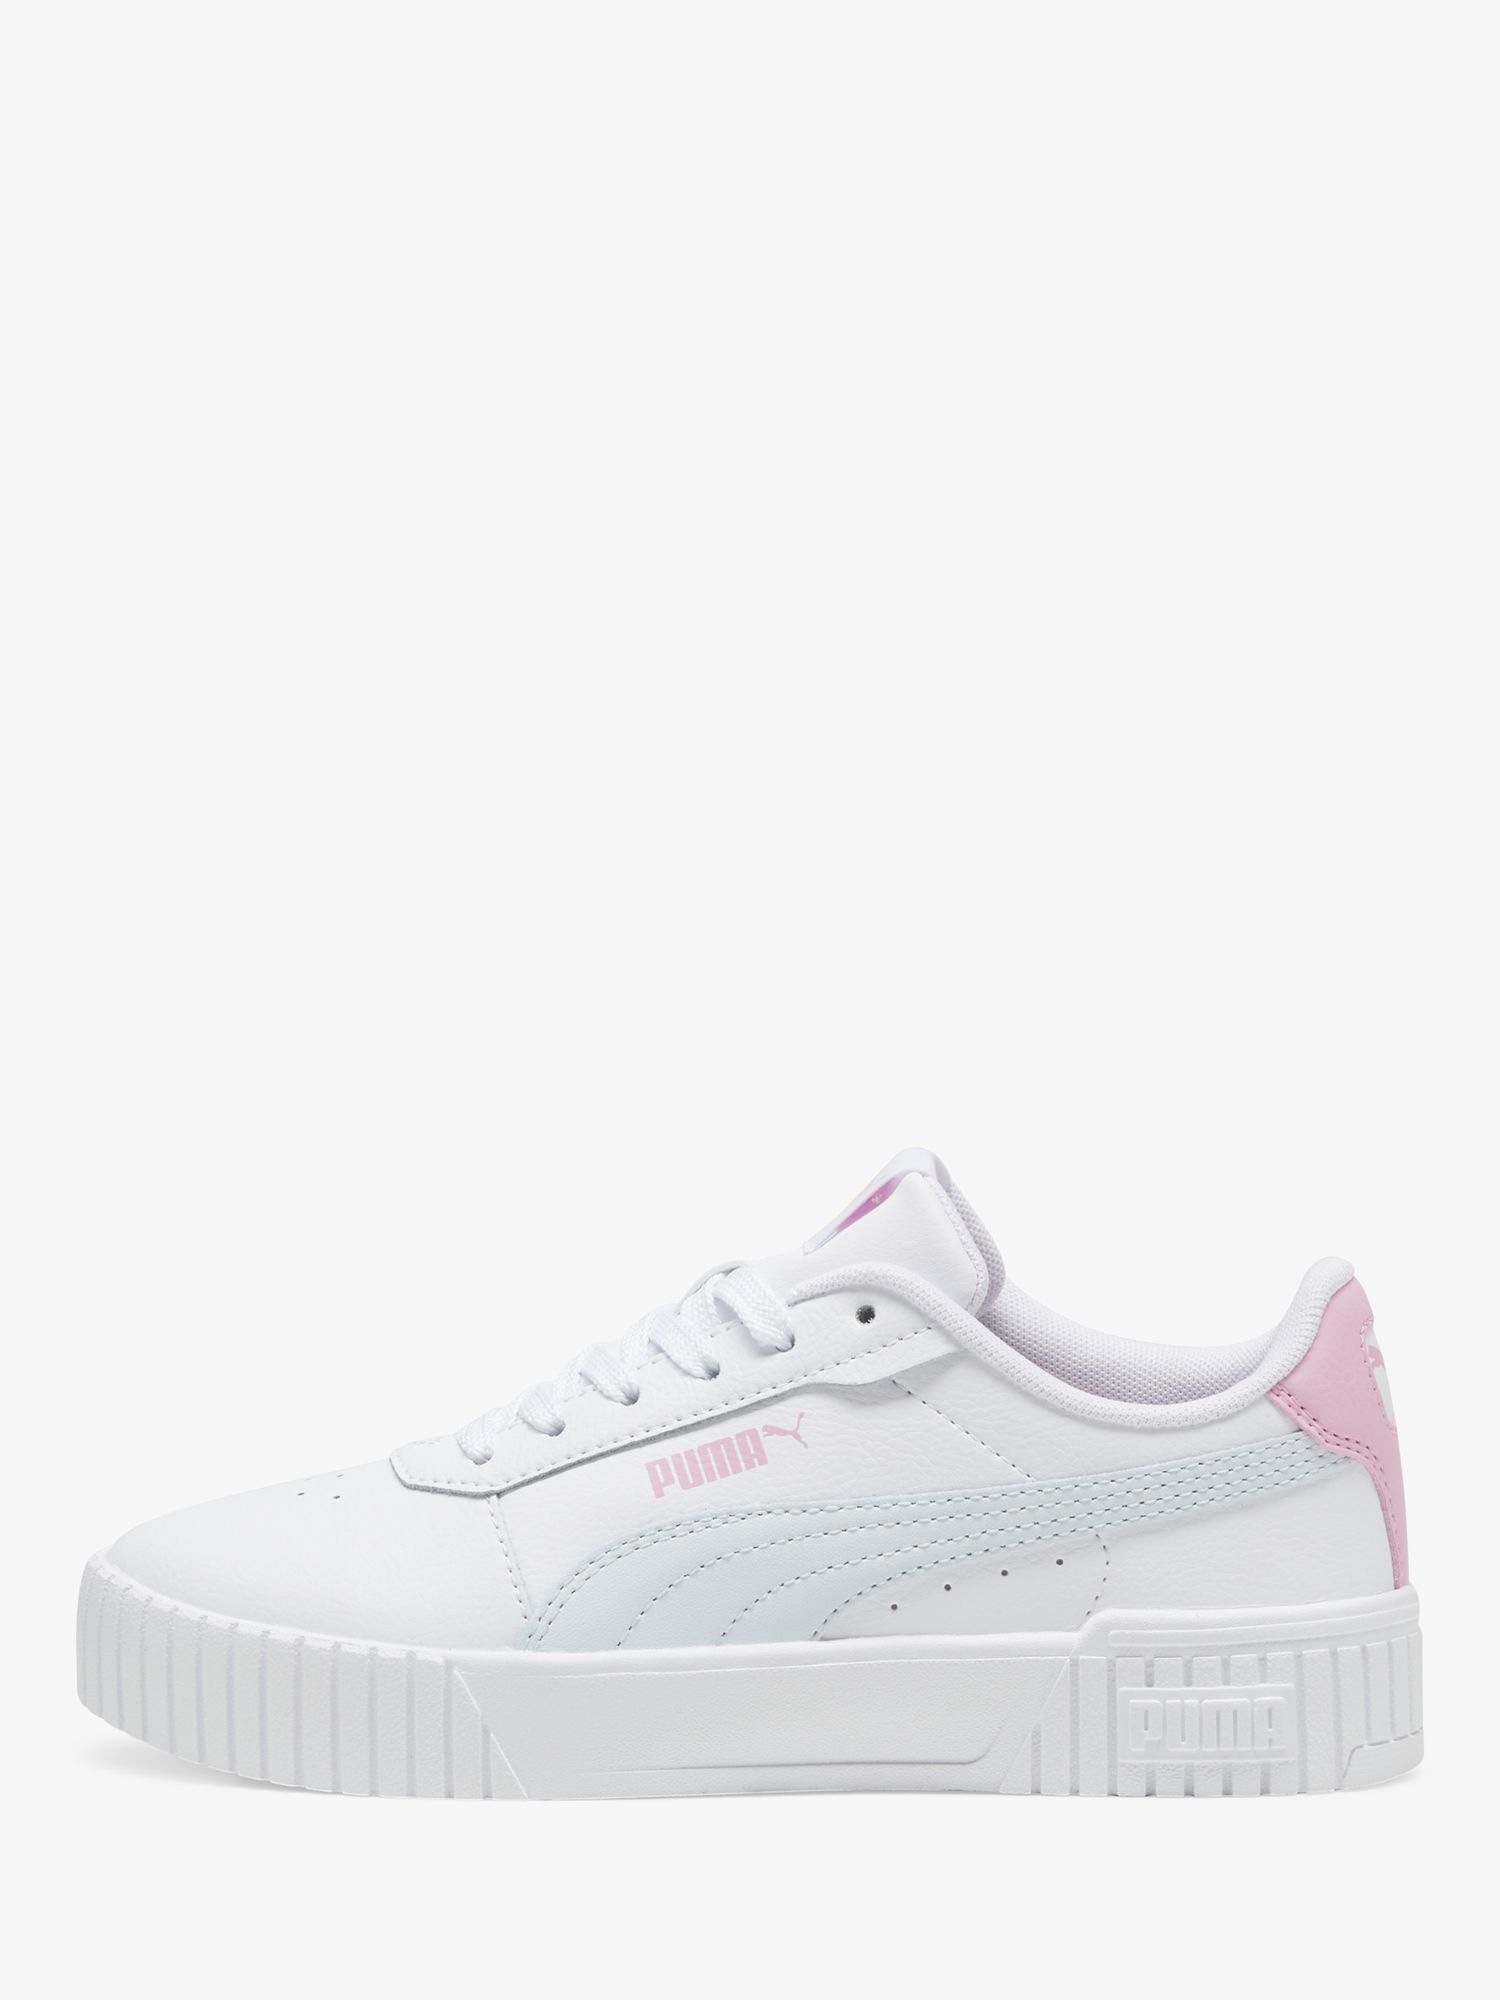 Buy PUMA Kids' Carina 2.0 Leather Trainers, White/Multi Online at johnlewis.com